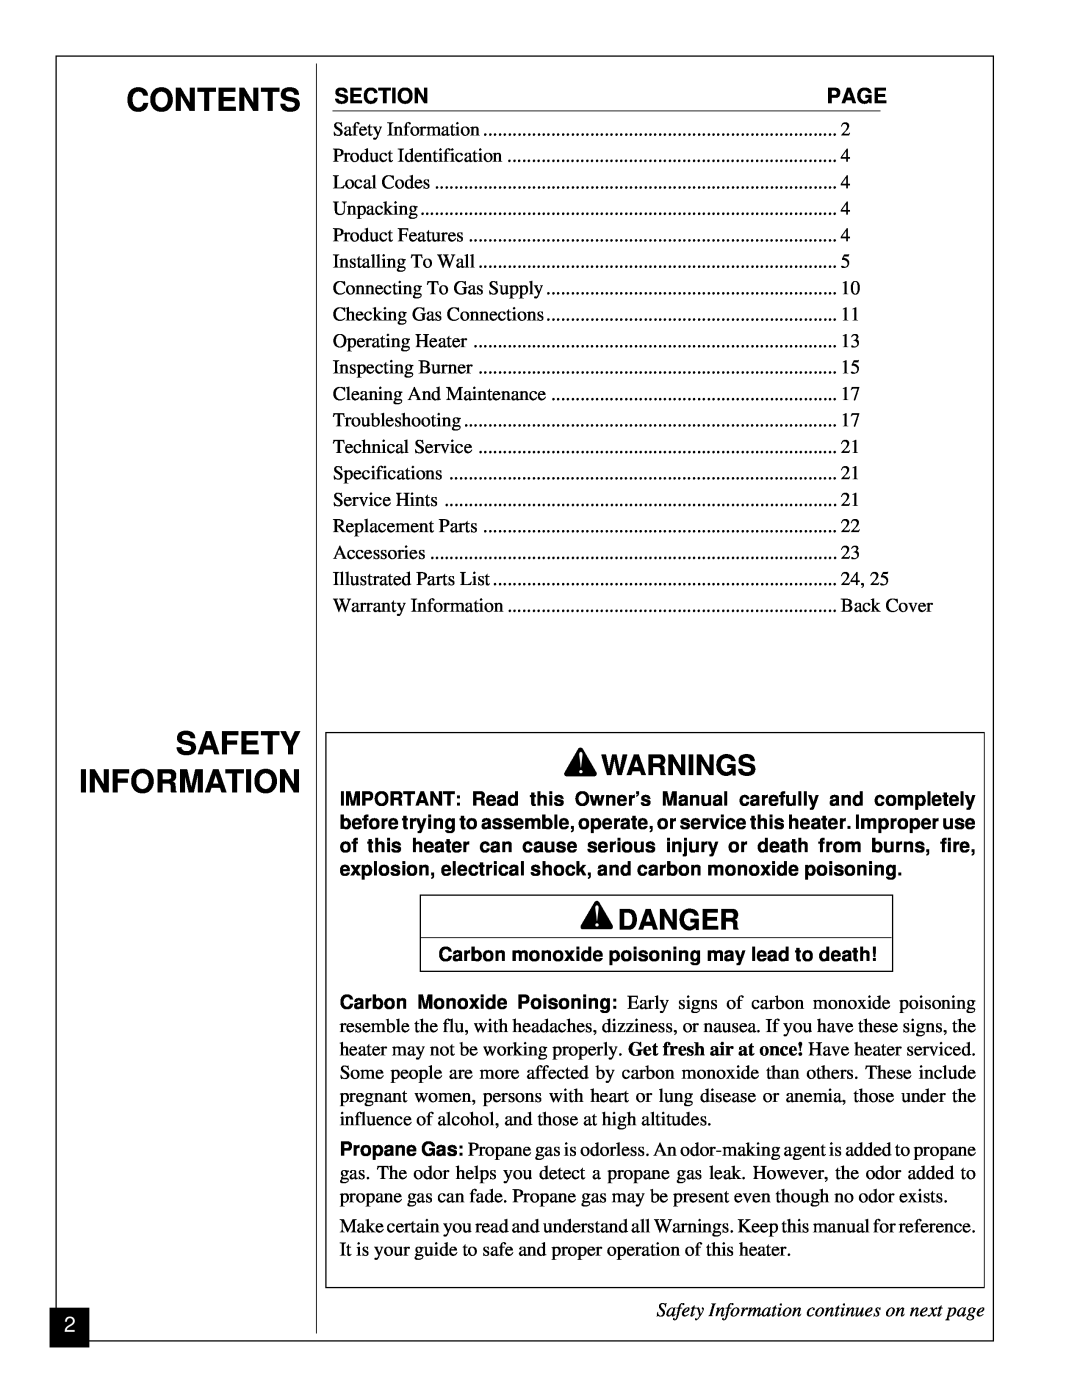 Desa VGP30 installation manual Contents Safety Information, Warnings, Danger, Safety Information continues on next page 